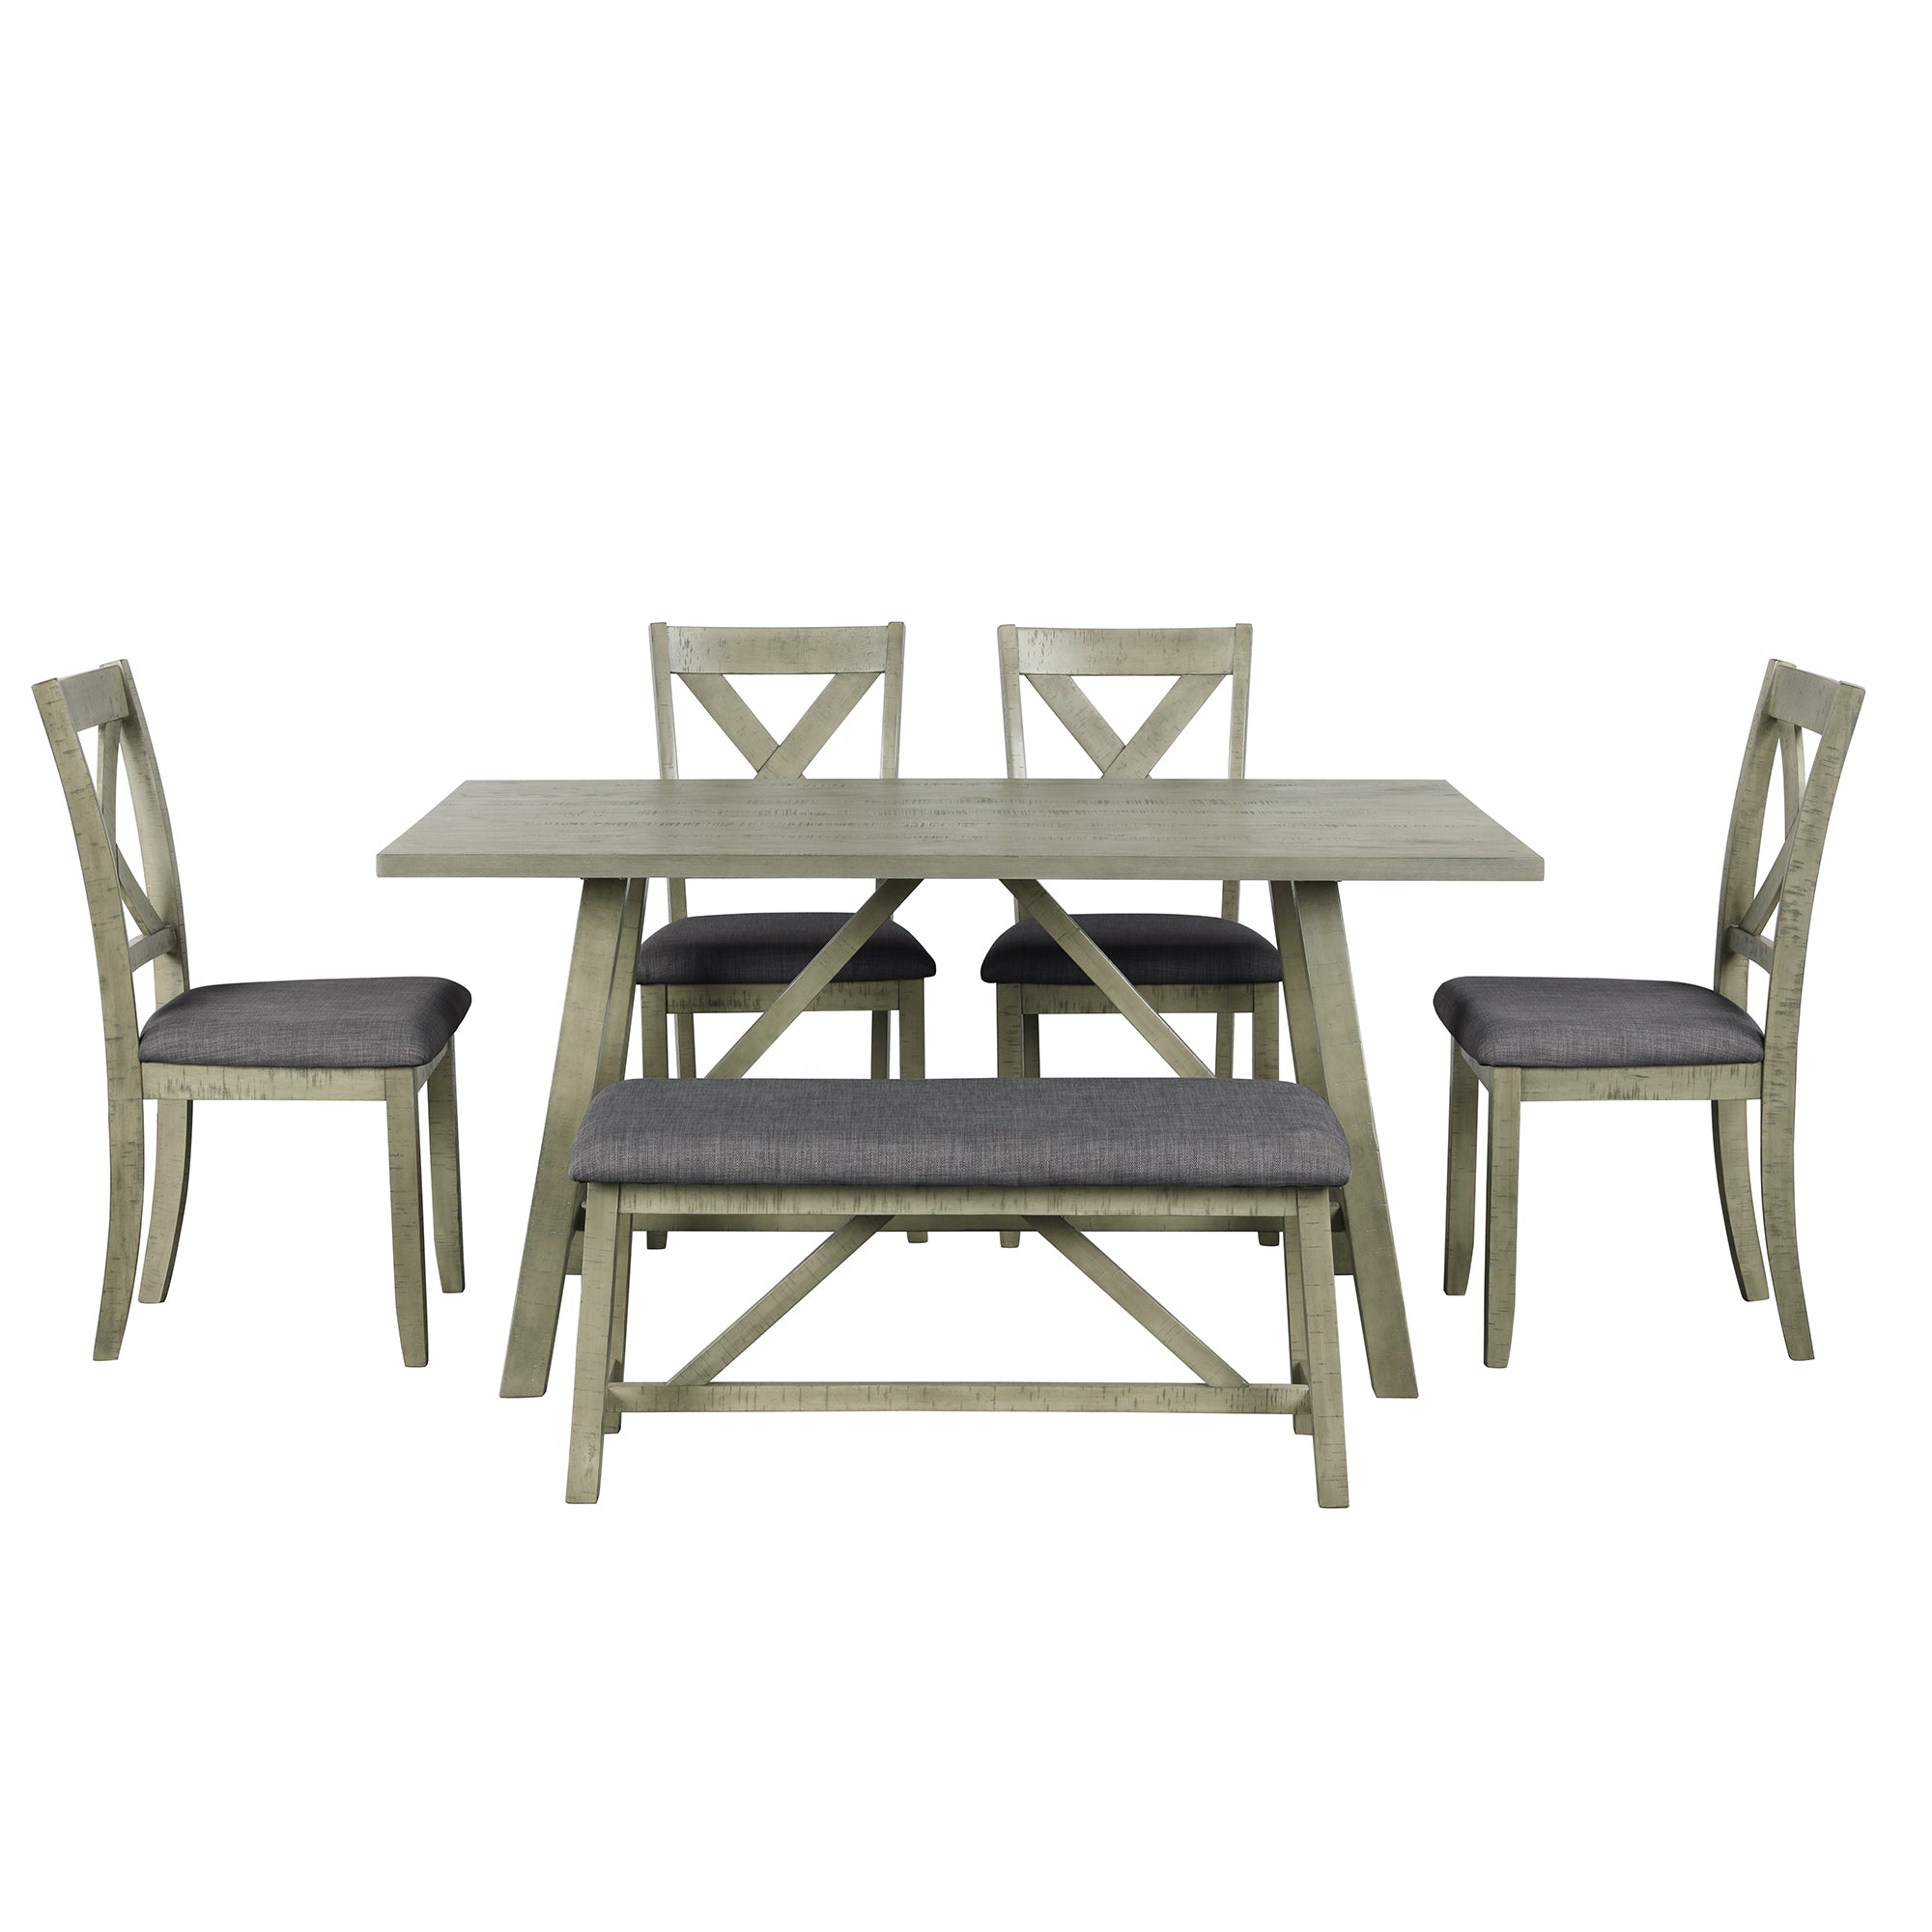 6 Piece Dining Table Set Wood Dining Table and chair Kitchen Table Set with Table, Bench and 4 Chairs, Rustic Style, Gray